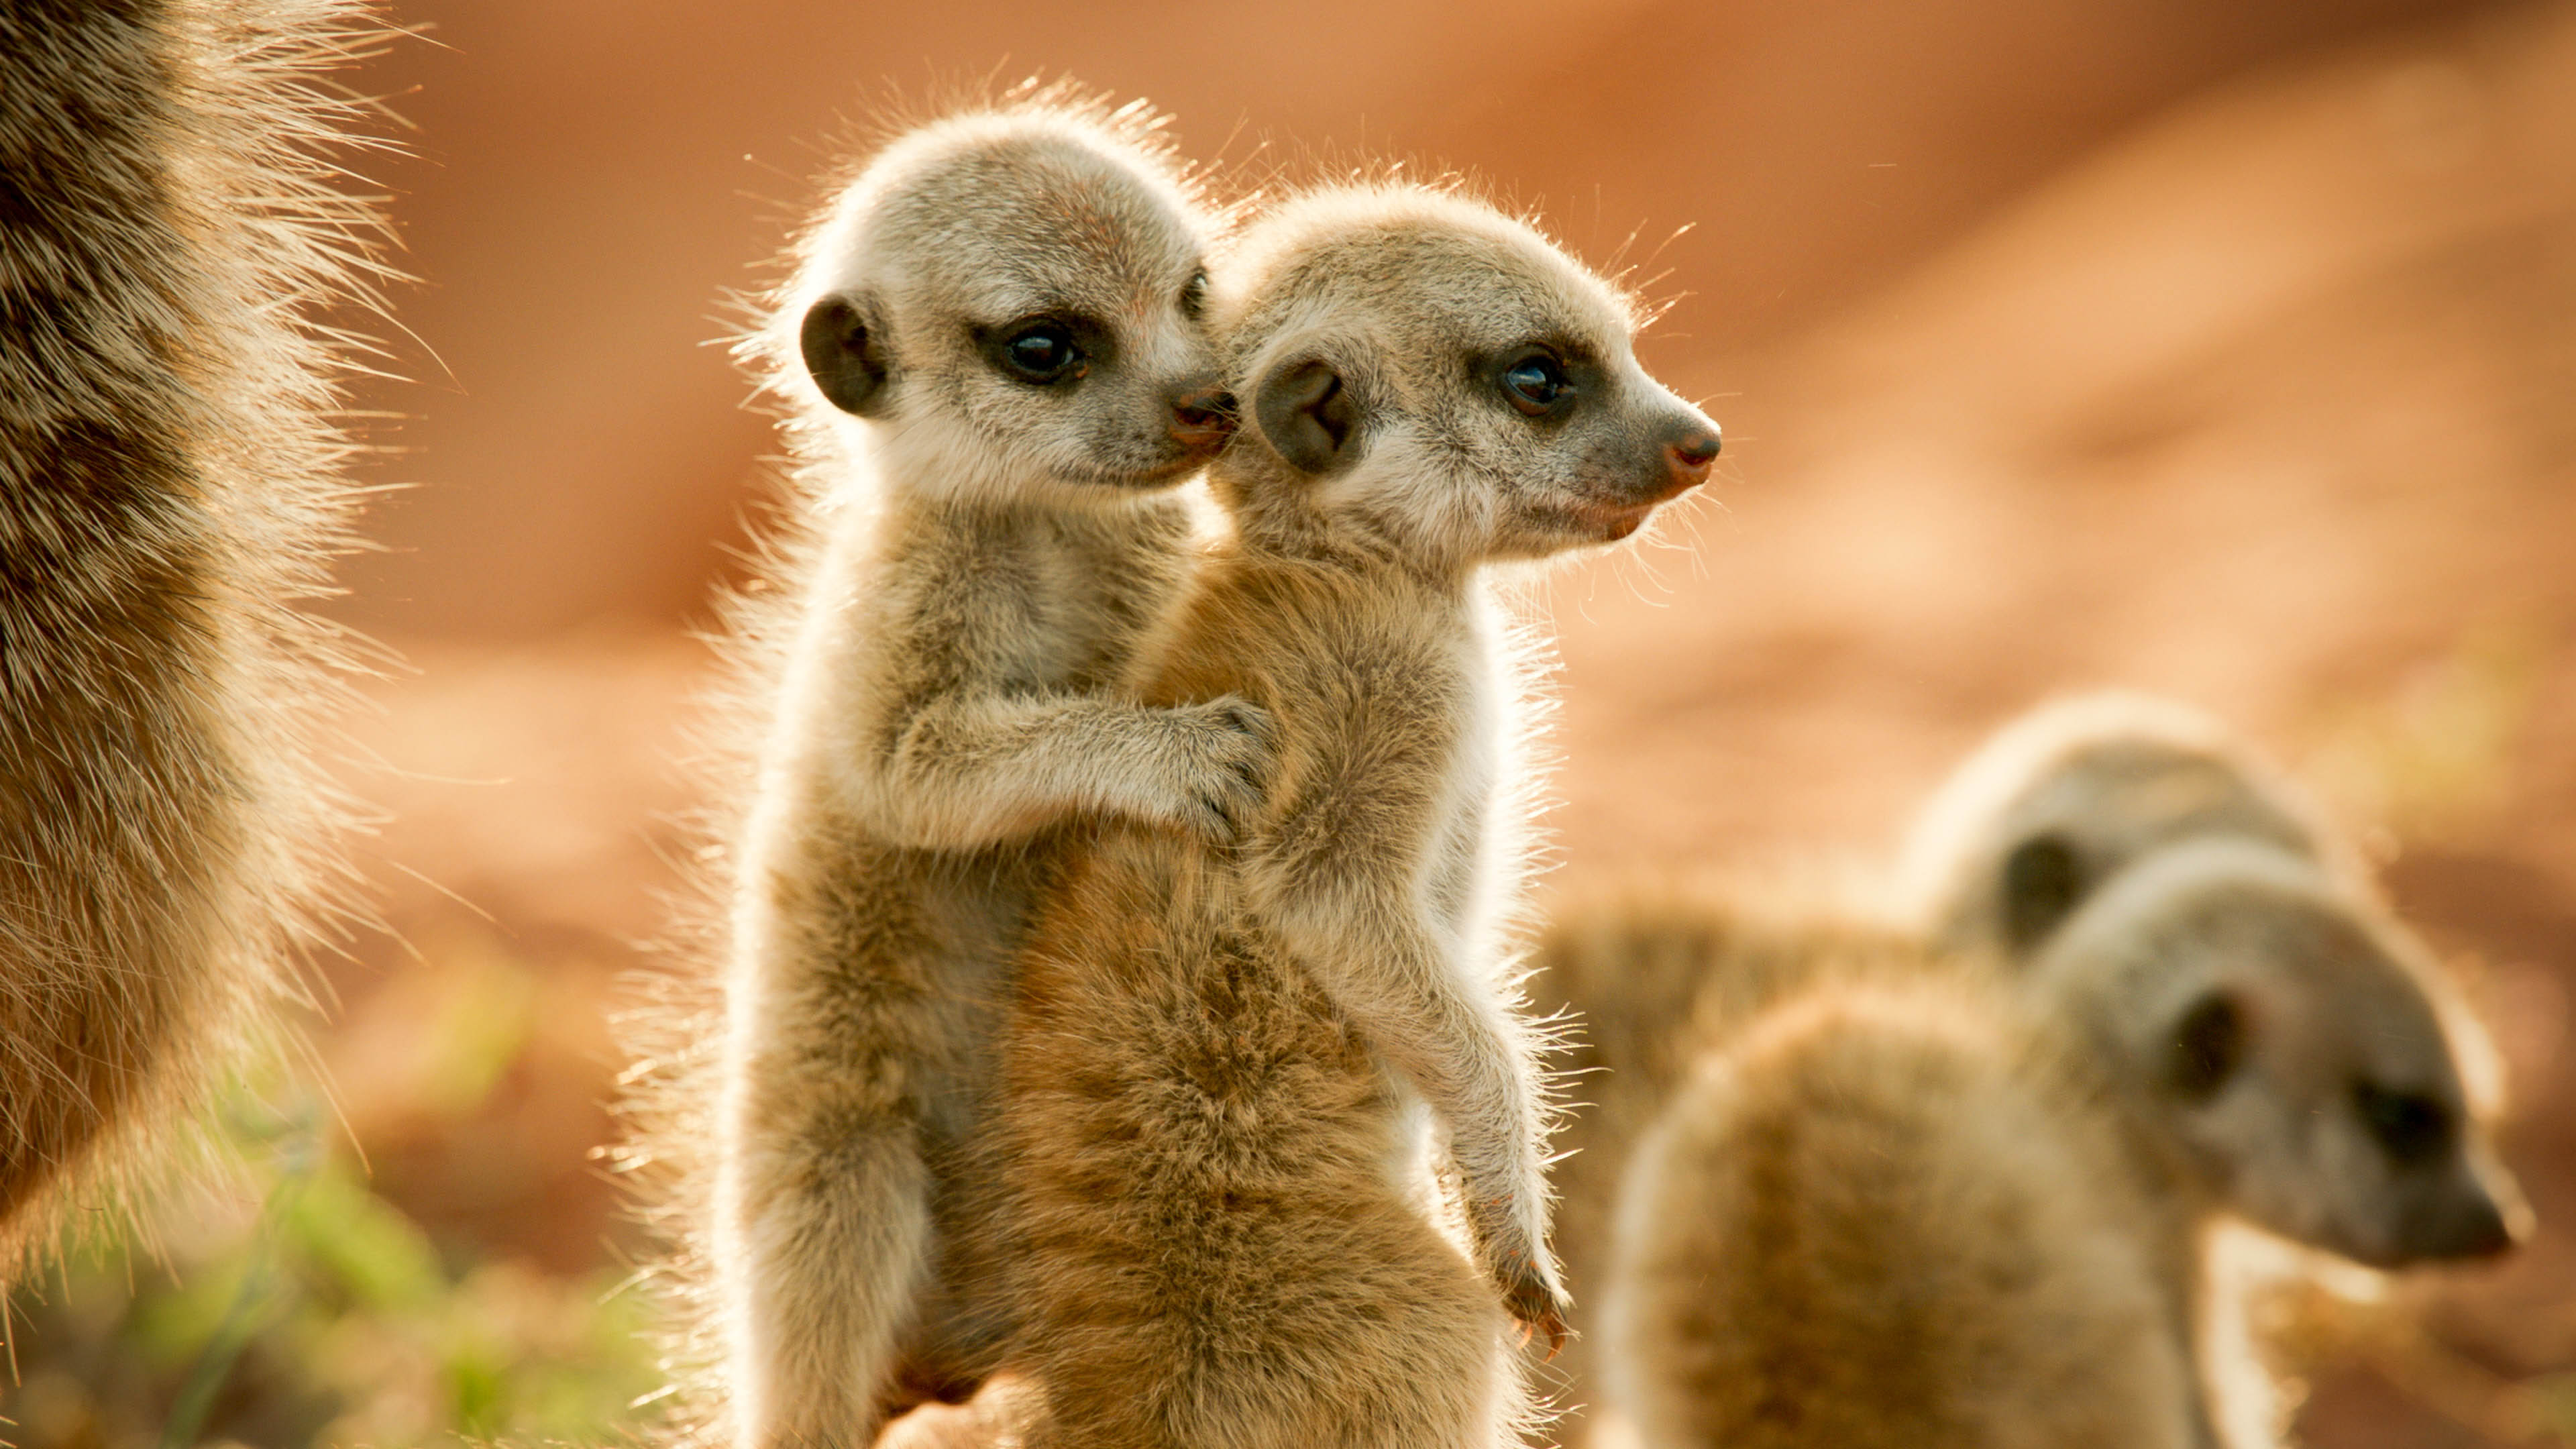 LIFE: FIRST STEPS, Episode 102 - Meerkats in South Africa